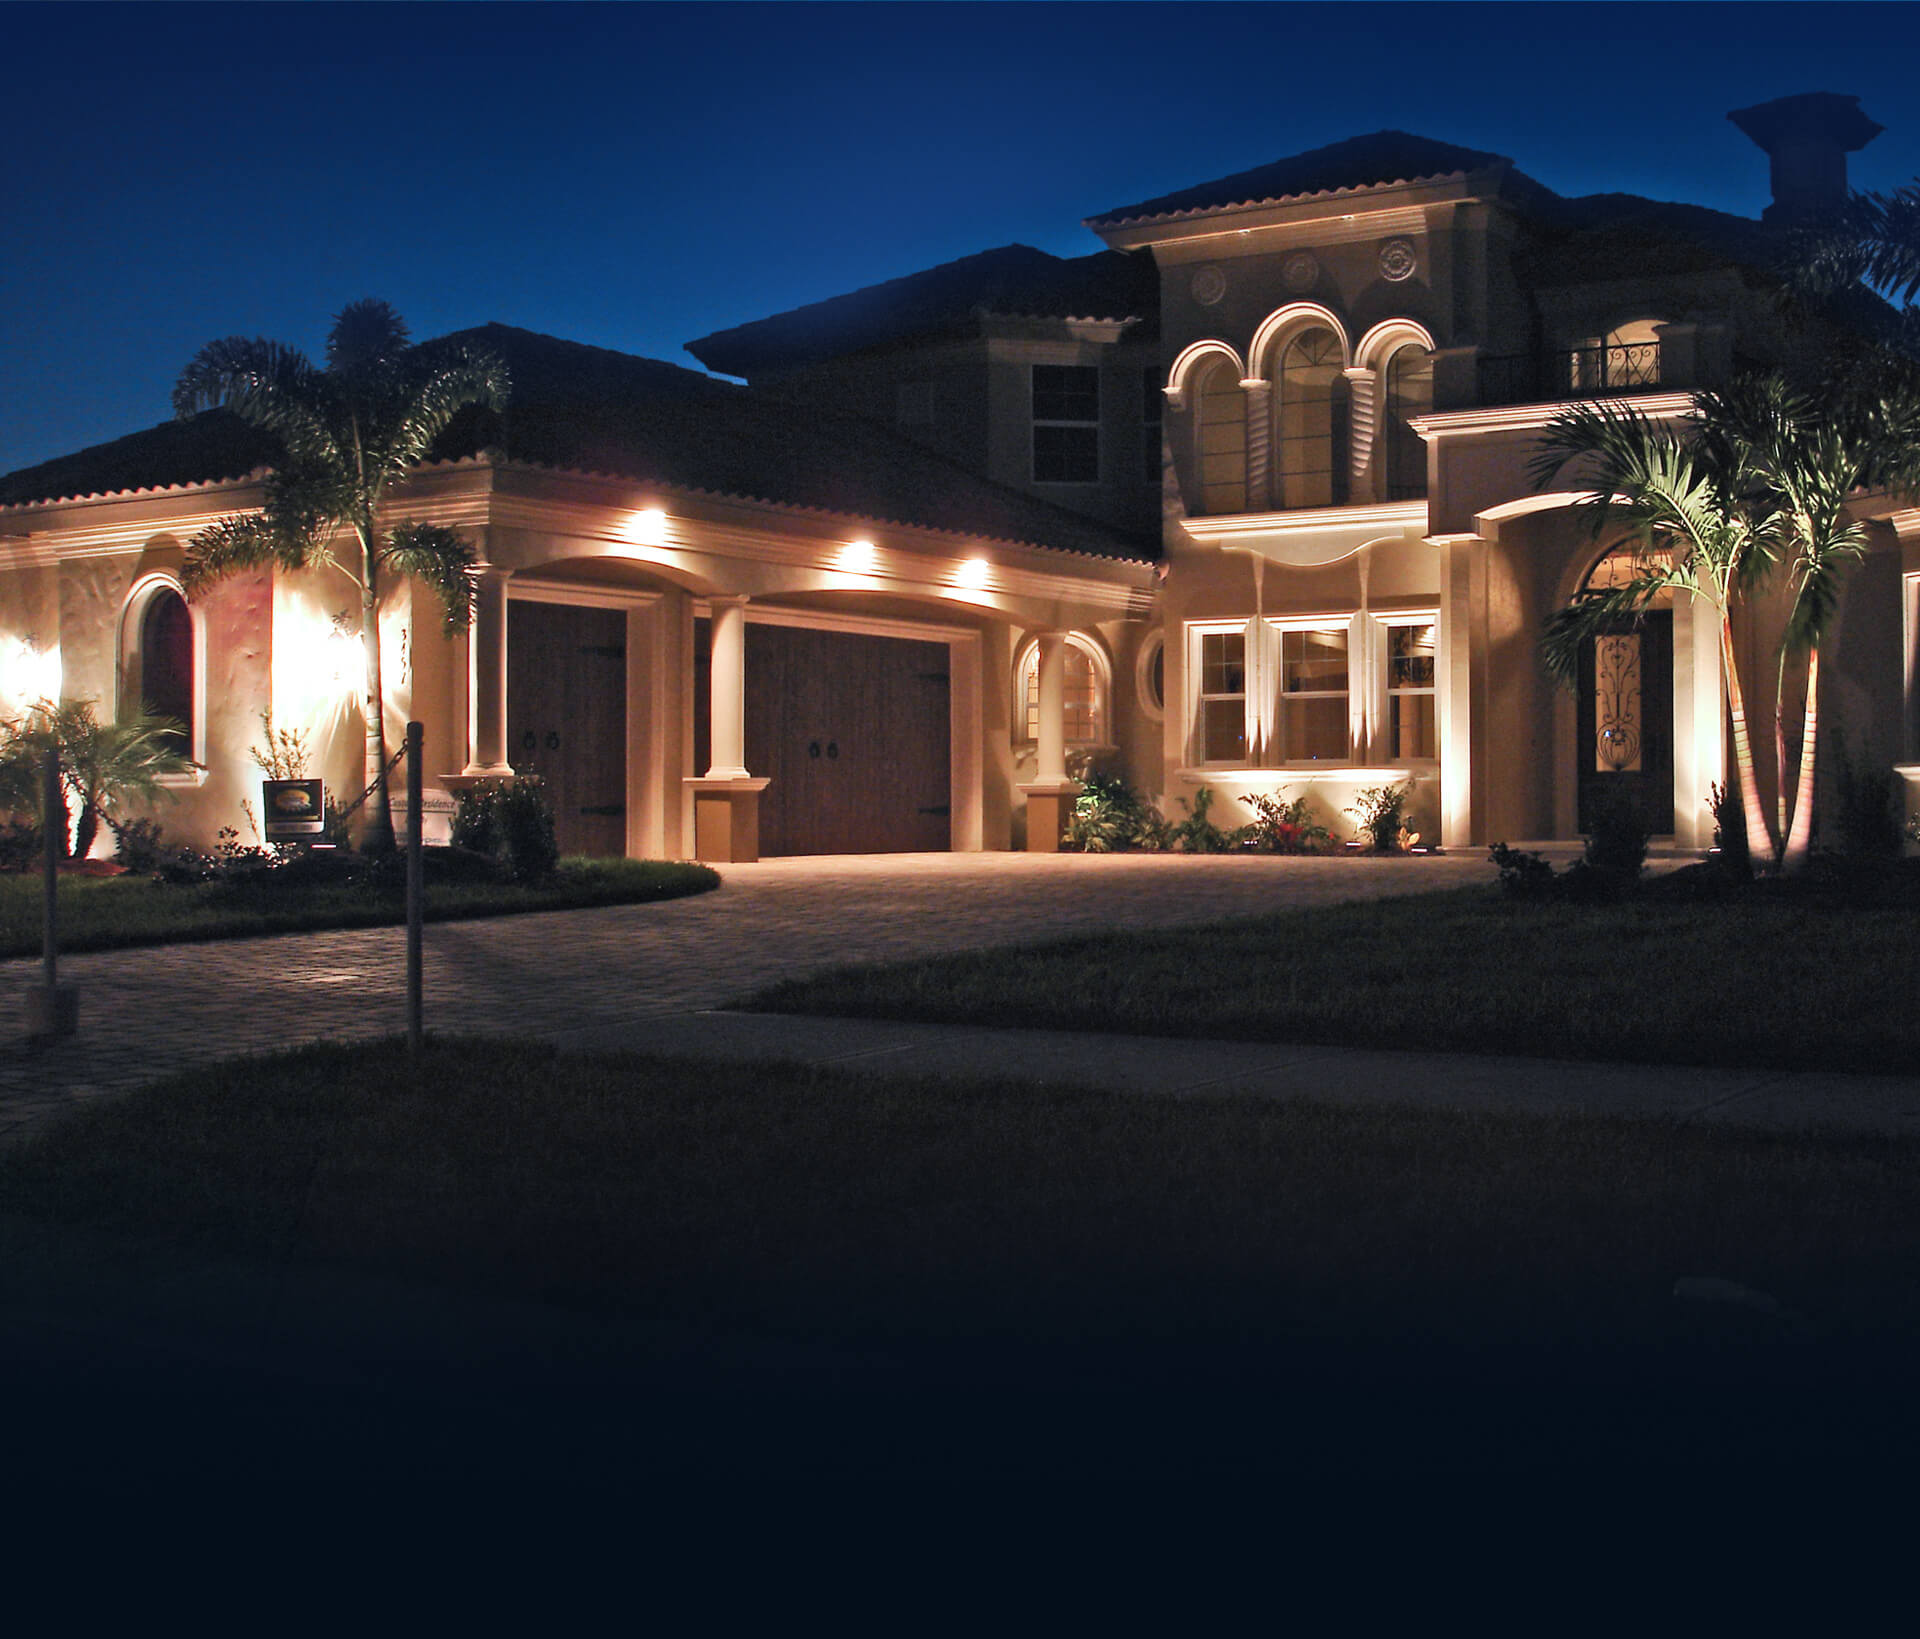 Florida home with outdoor lighting system